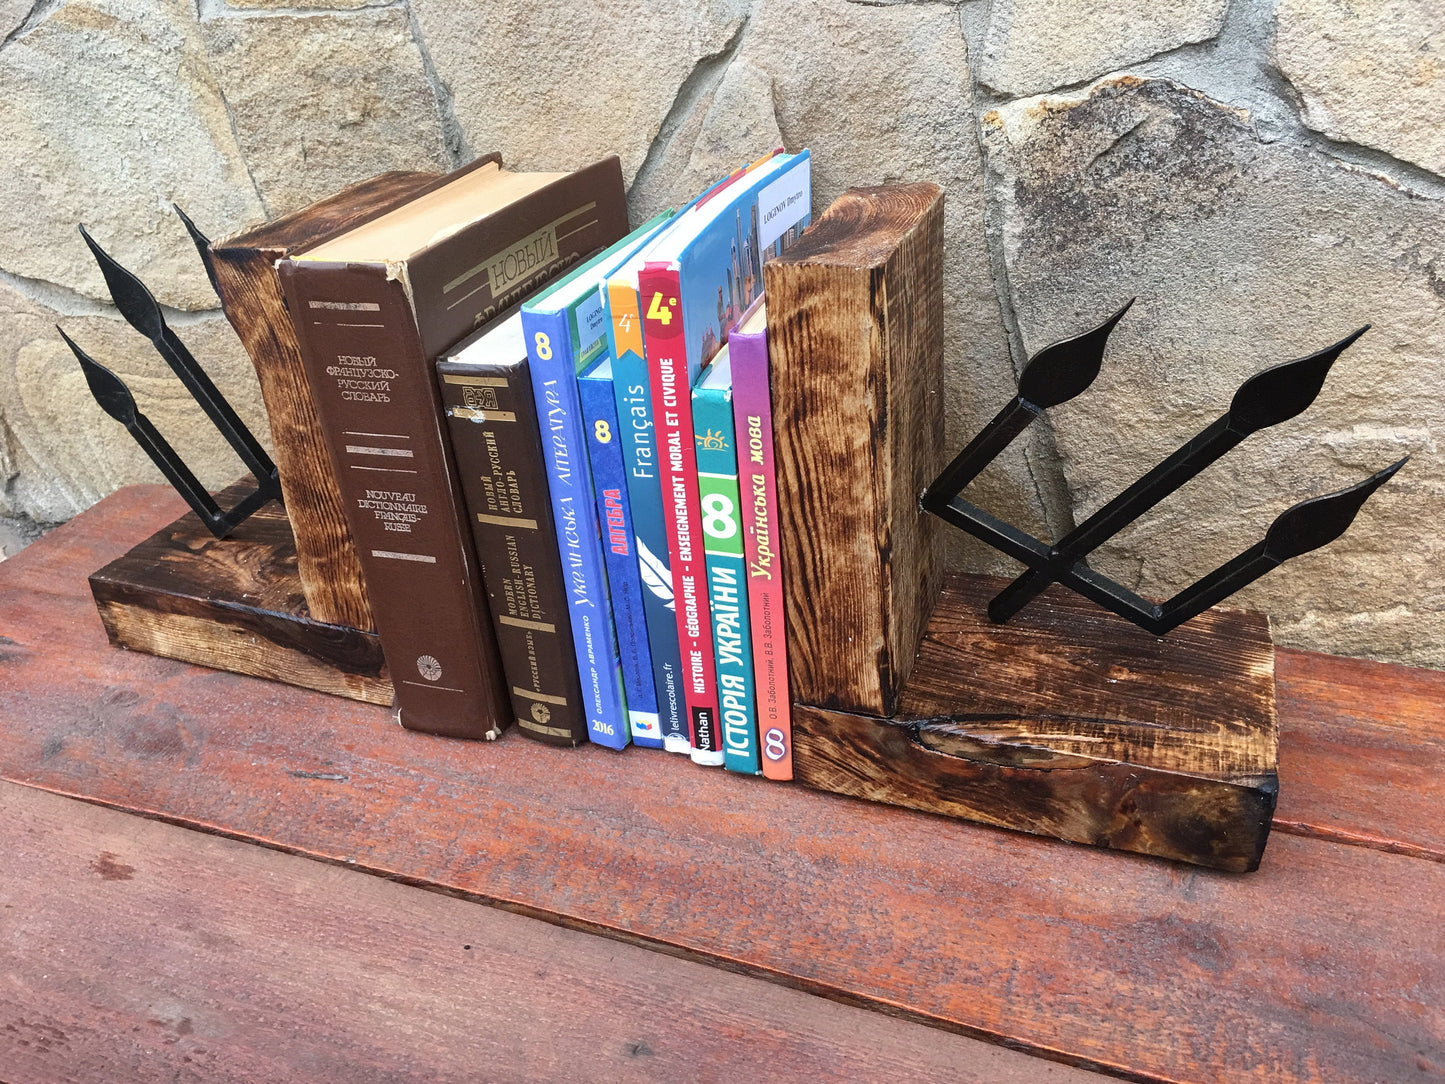 Bookends, trident, book ends, book lover, bookend, book lover gift, book end, book holders, bookends gothic, bookends custom,bookends rustic